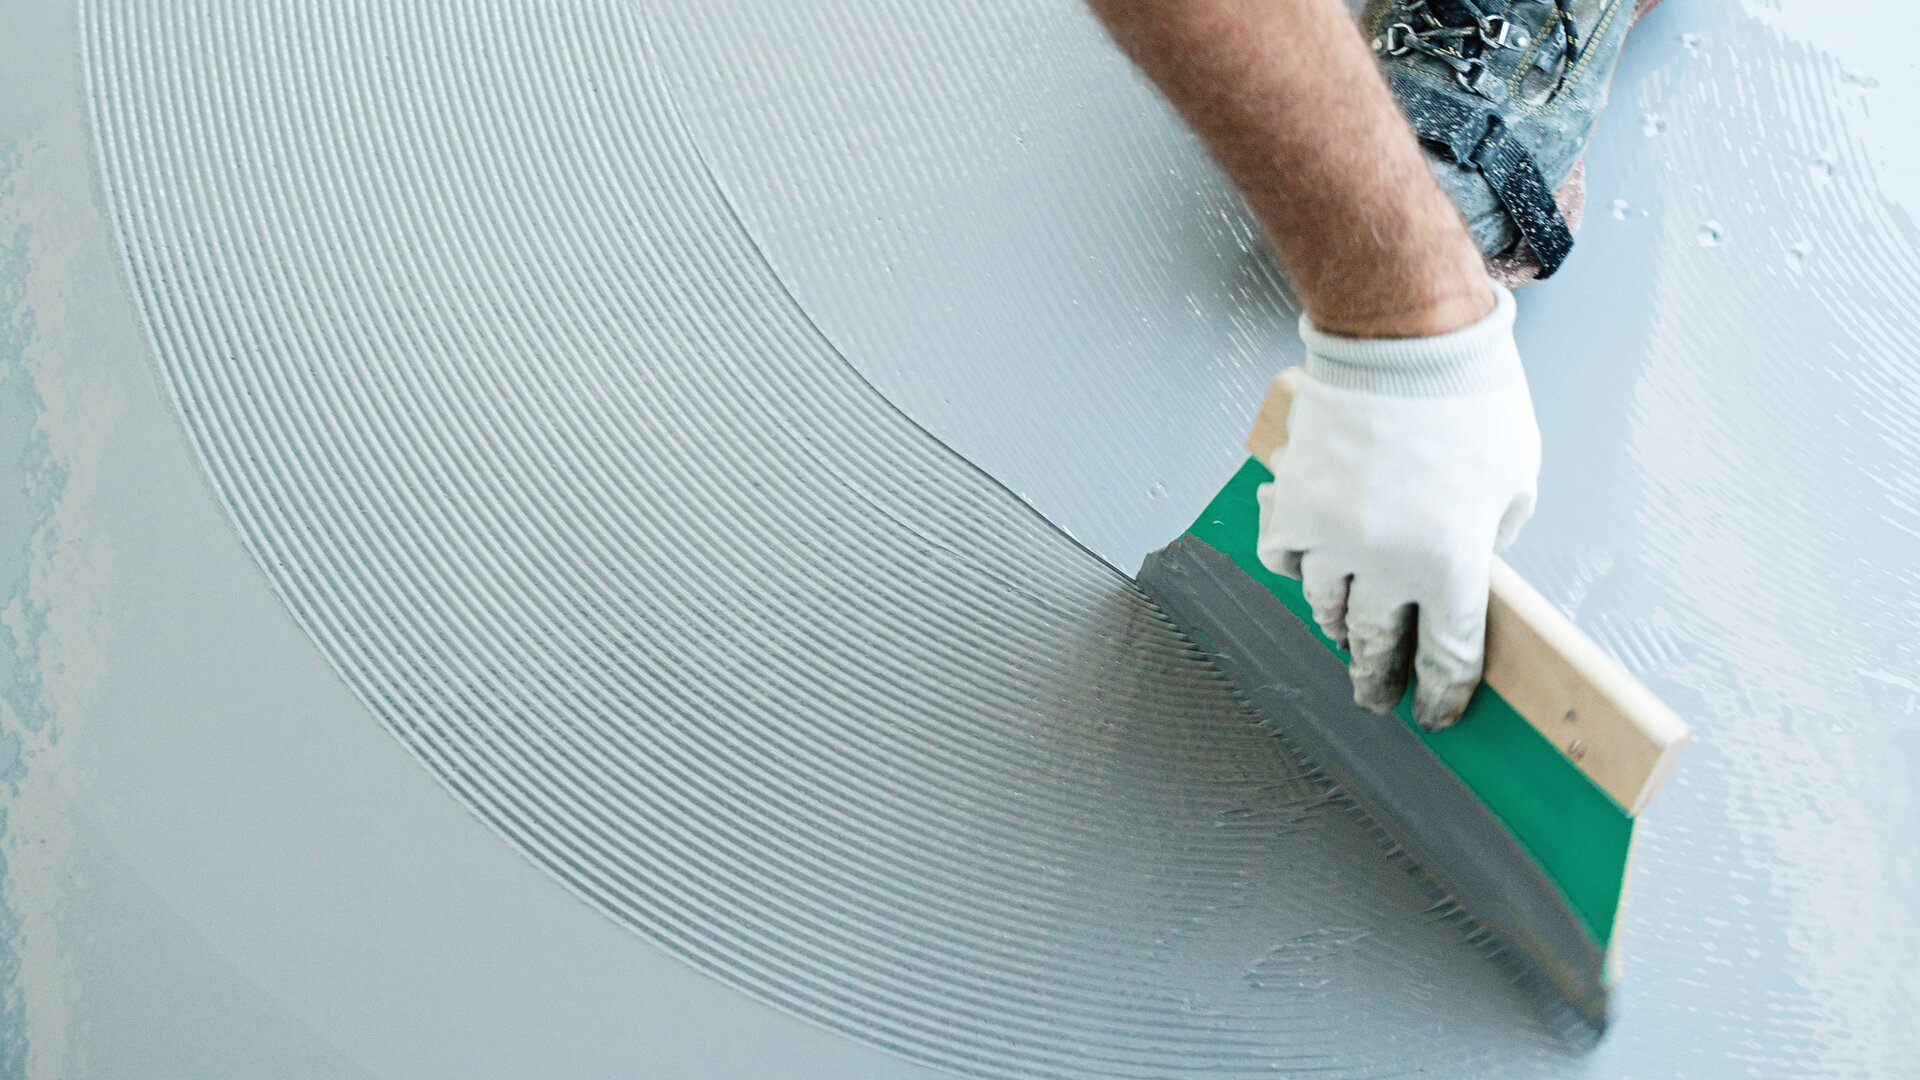 Hand of a Ramsauer employee using a smoothing tool to spread sealing slurry evenly over a surface.